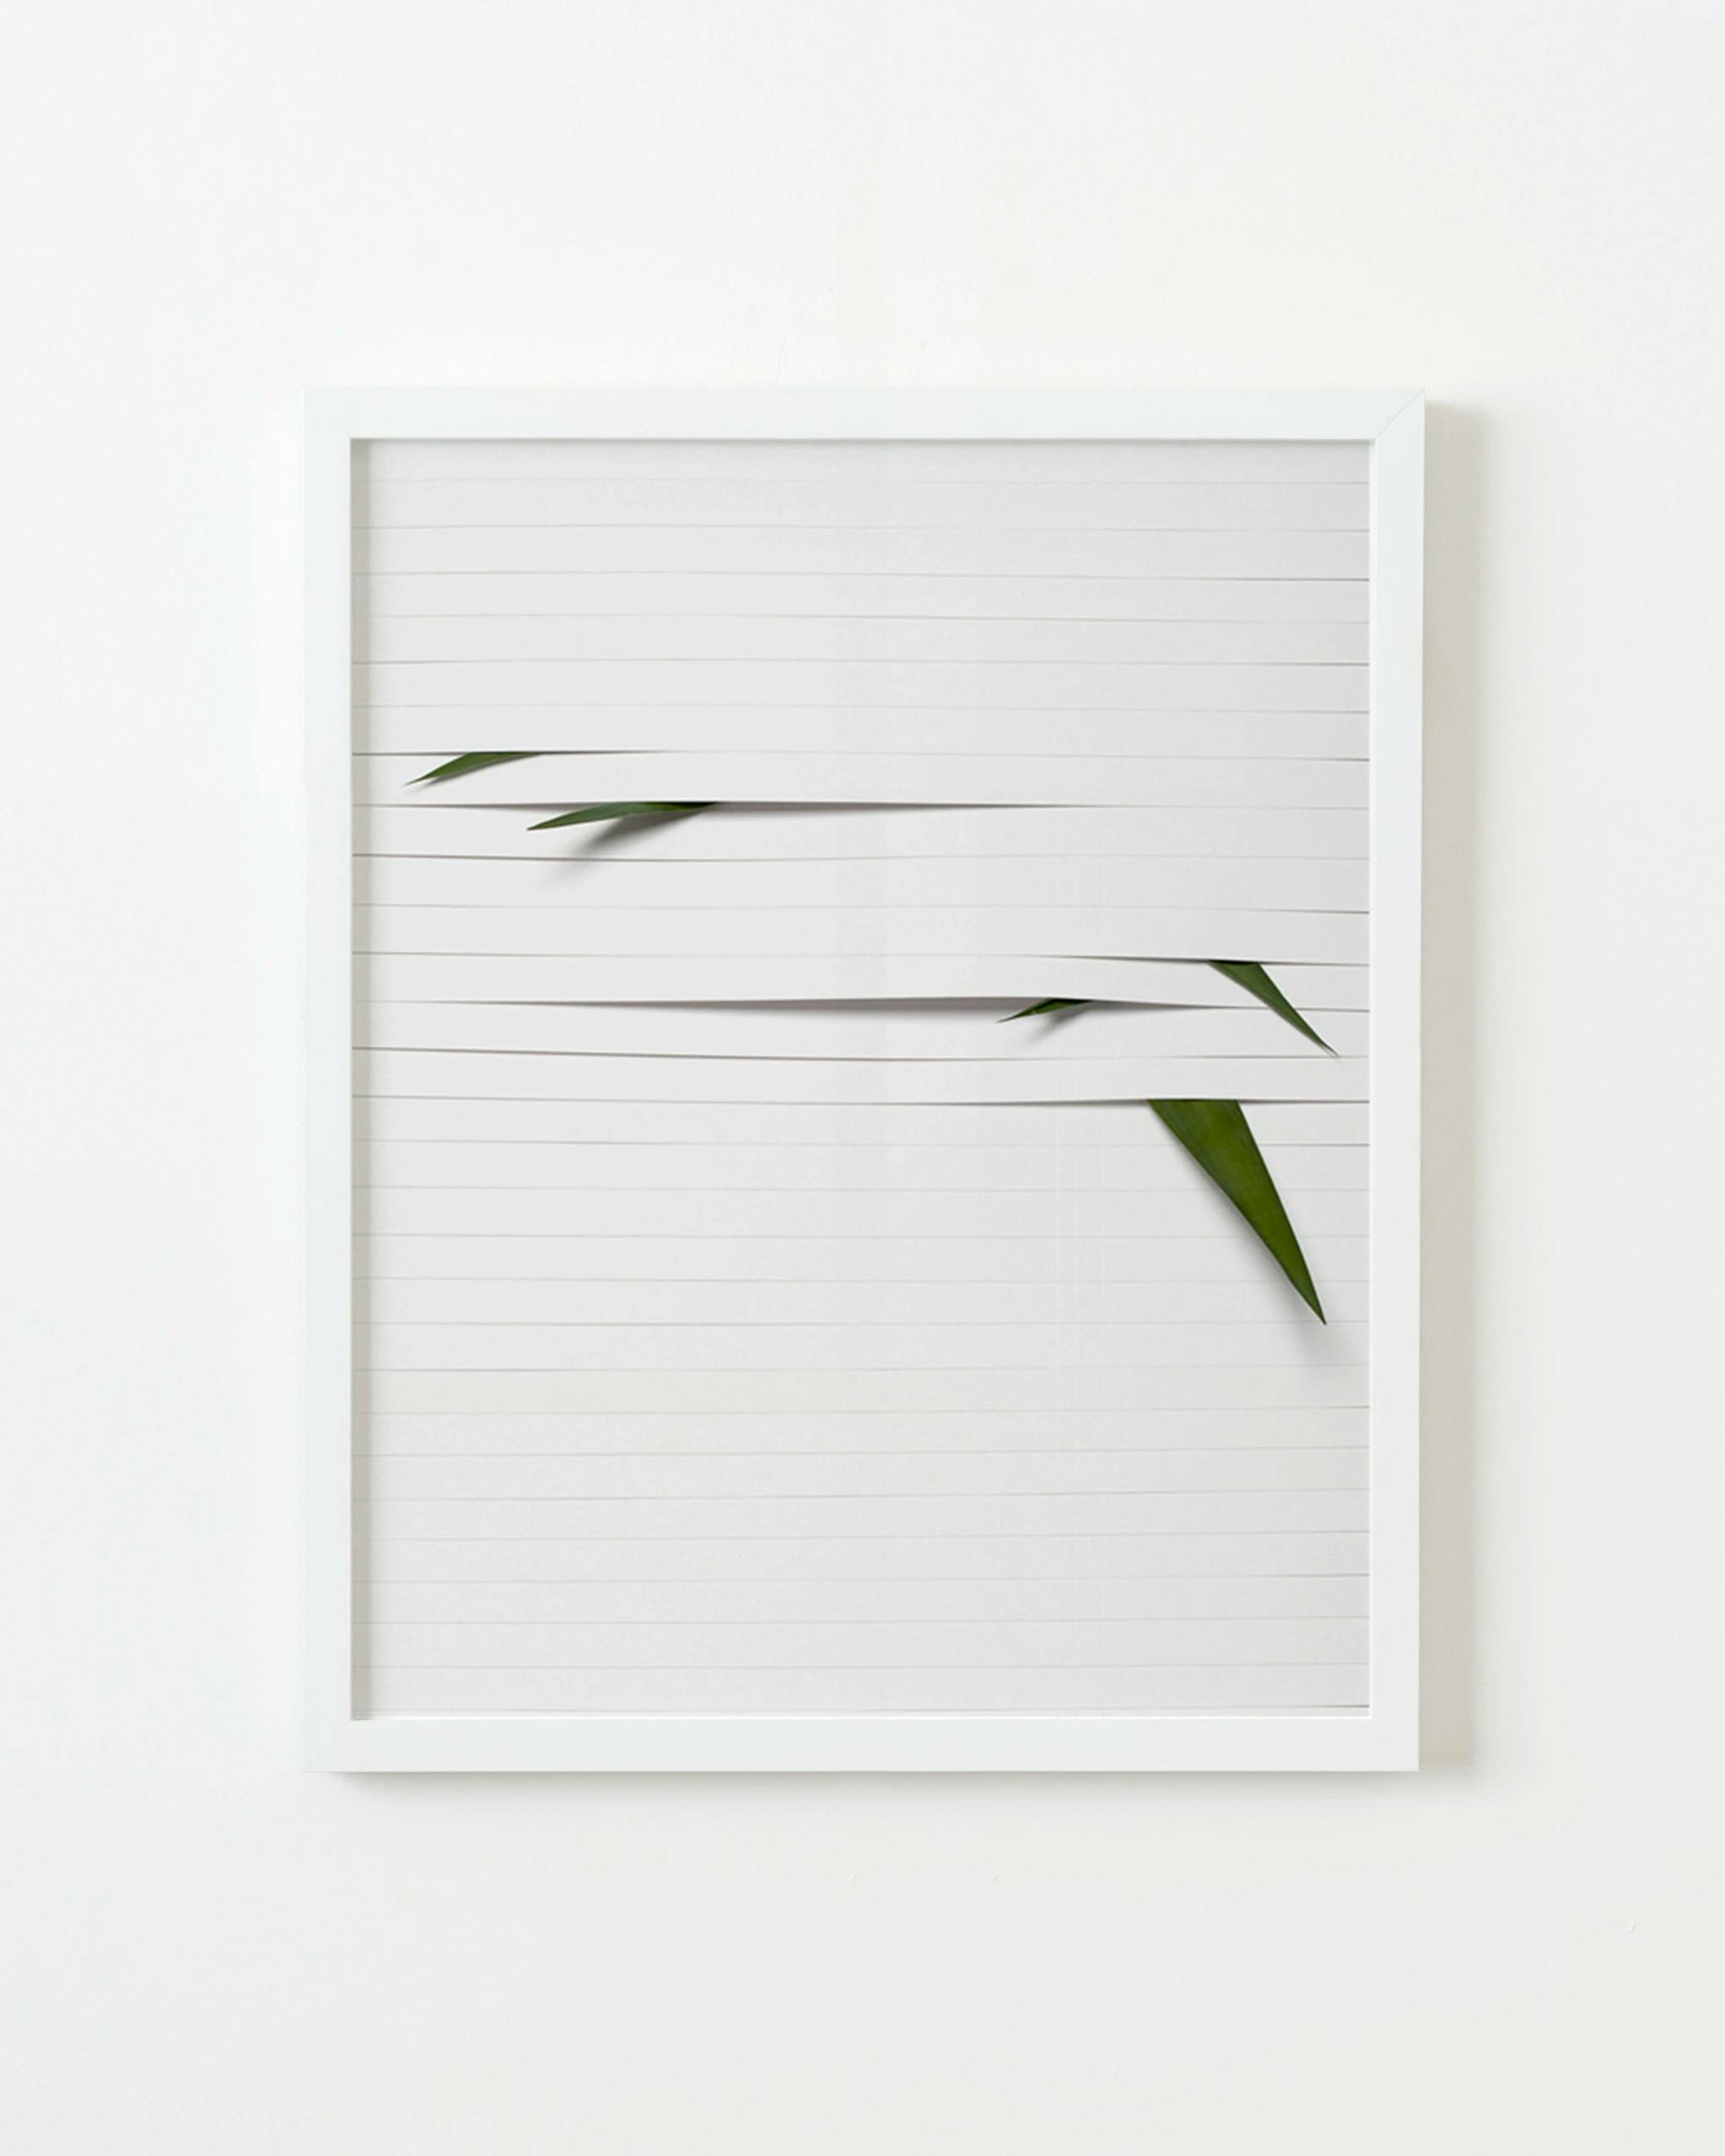 Framed photograph of white blinds with plants peeking out from underneath by artist Martina Lang.